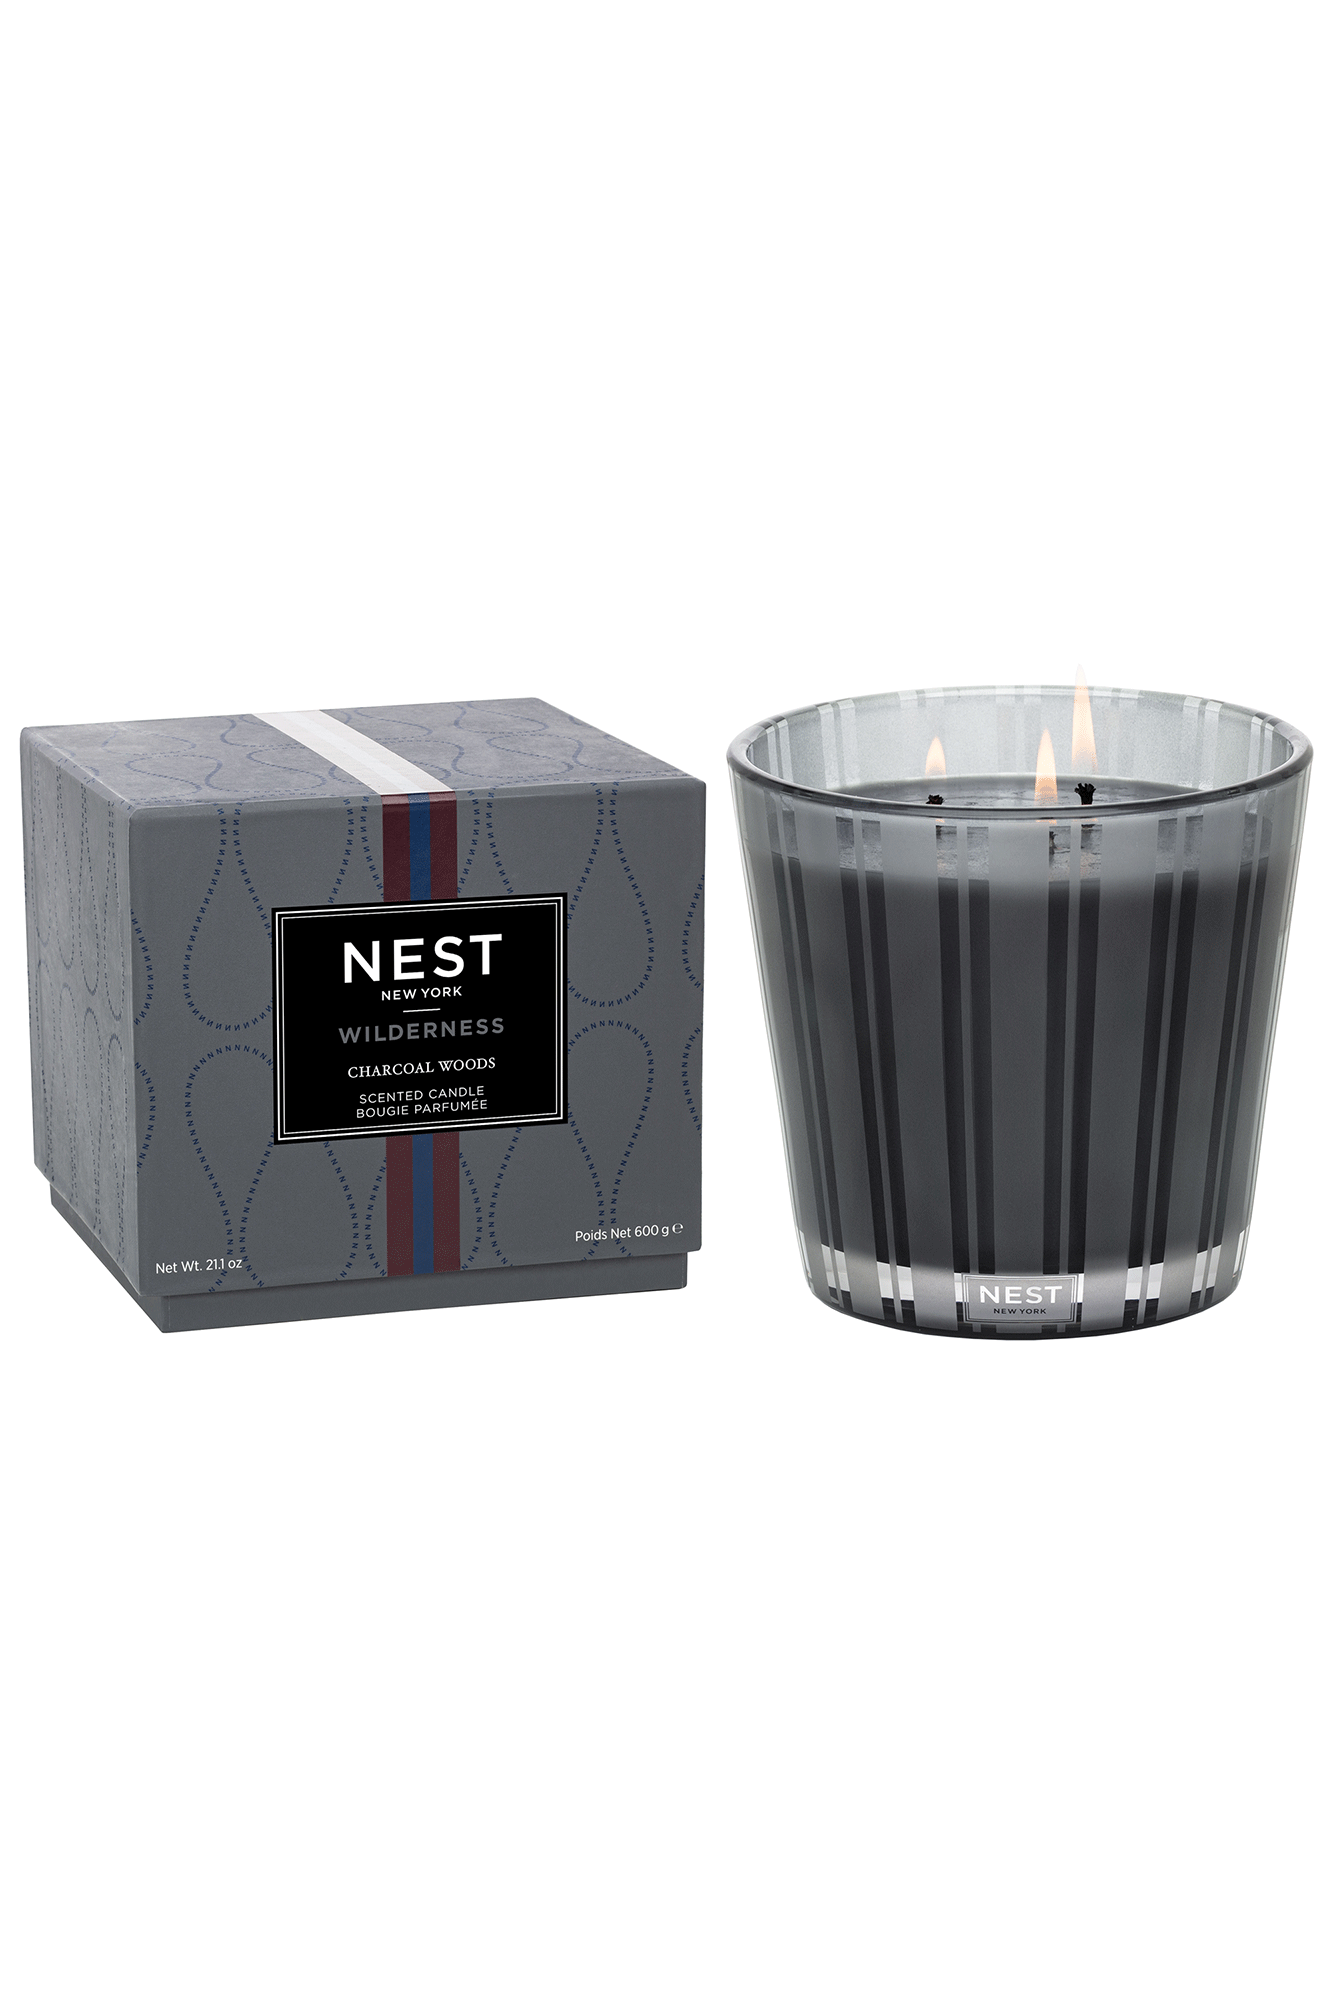 Experience the depths of a mysterious forest with Charcoal Woods 3 Wick Candle from Nest. Each candle releases a captivating aroma of smoky labdanum, patchouli, cedarwood, charred birchwood, and a hint of black truffle. Enjoy a pleasant, natural atmosphere with this creamy paraffin-soy blend in your home.